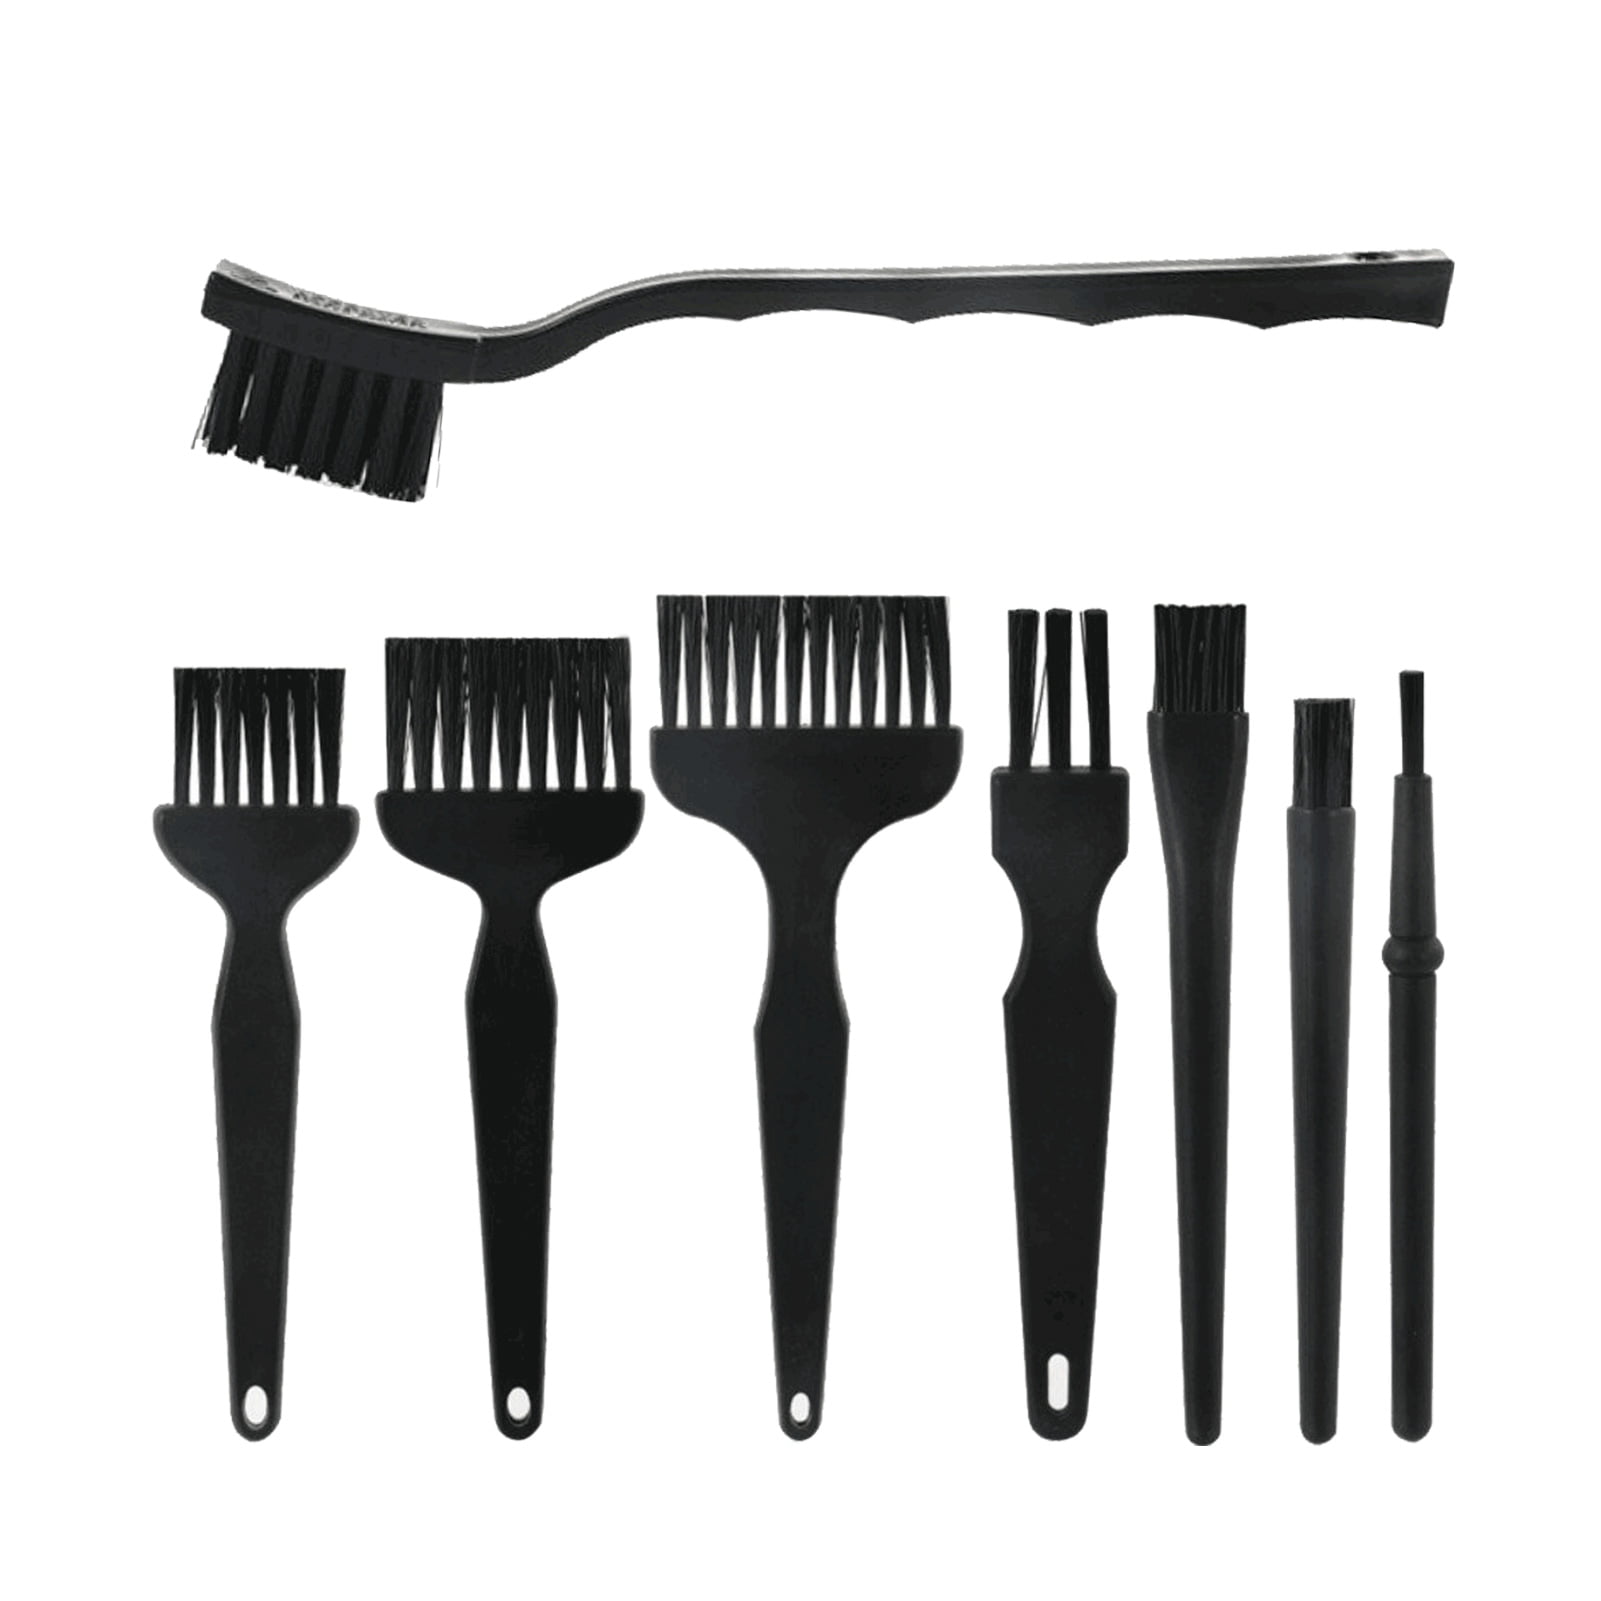 8PCS Keyboard Cleaning Brush Kit Anti Static Electronics Cleaners Portable Computer Laptops Cleaning Tools Black 